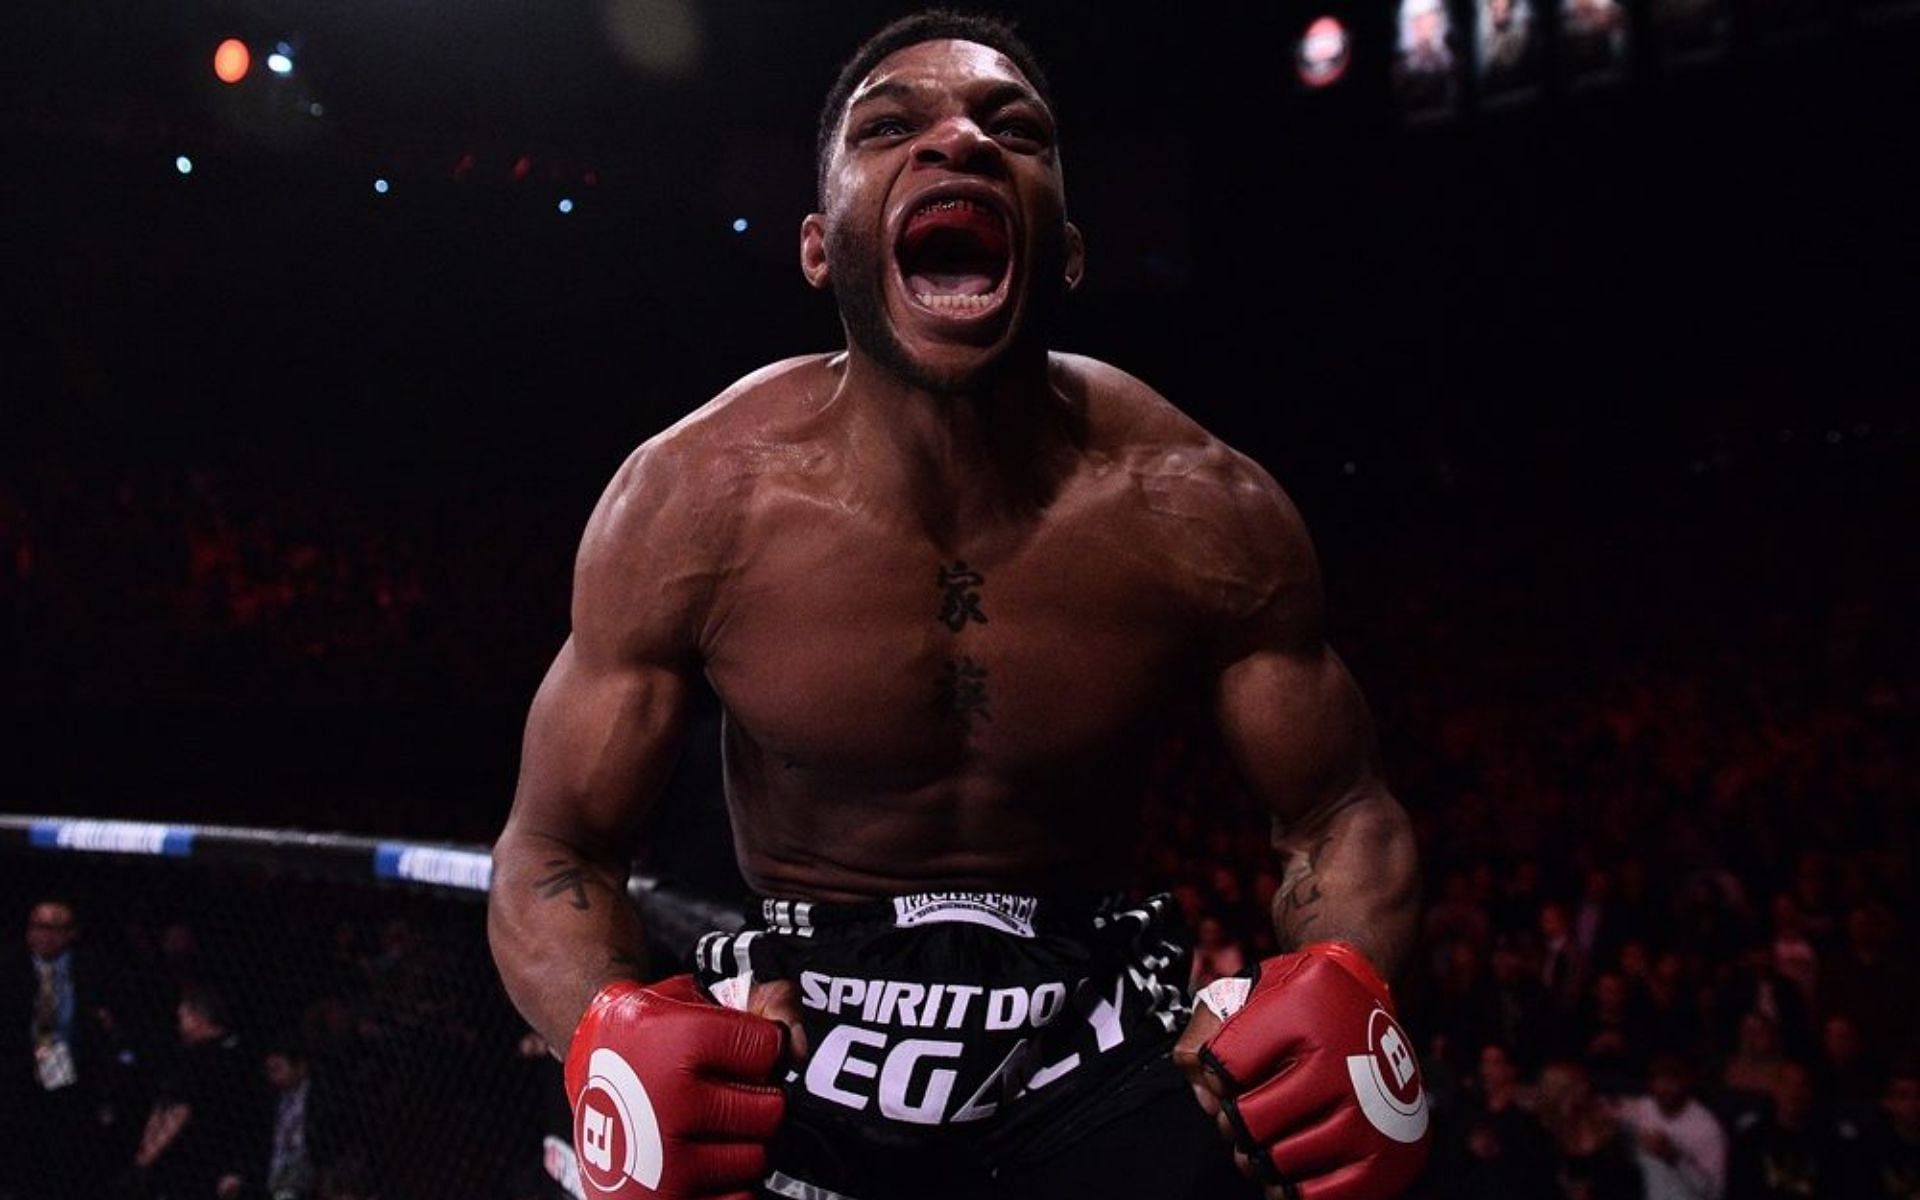 Paul Daley found himself expelled from the UFC, meaning he never lived up to his hype